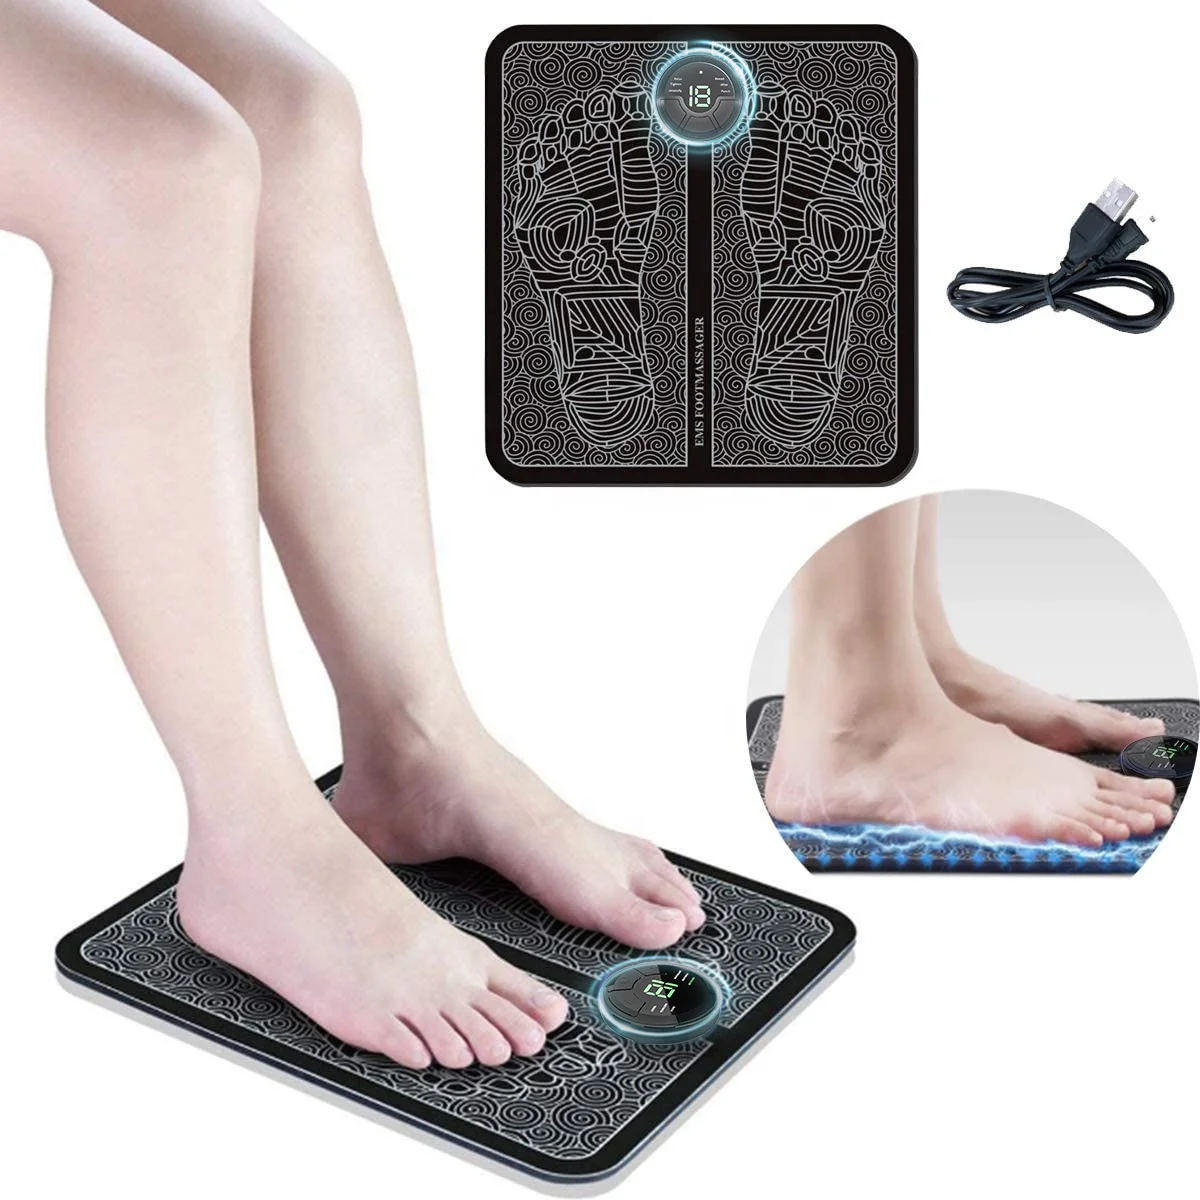 Ems Foot Massage Pad Electric Stimulator Massager With 6 Modes 10 Intensity  Levels,battery